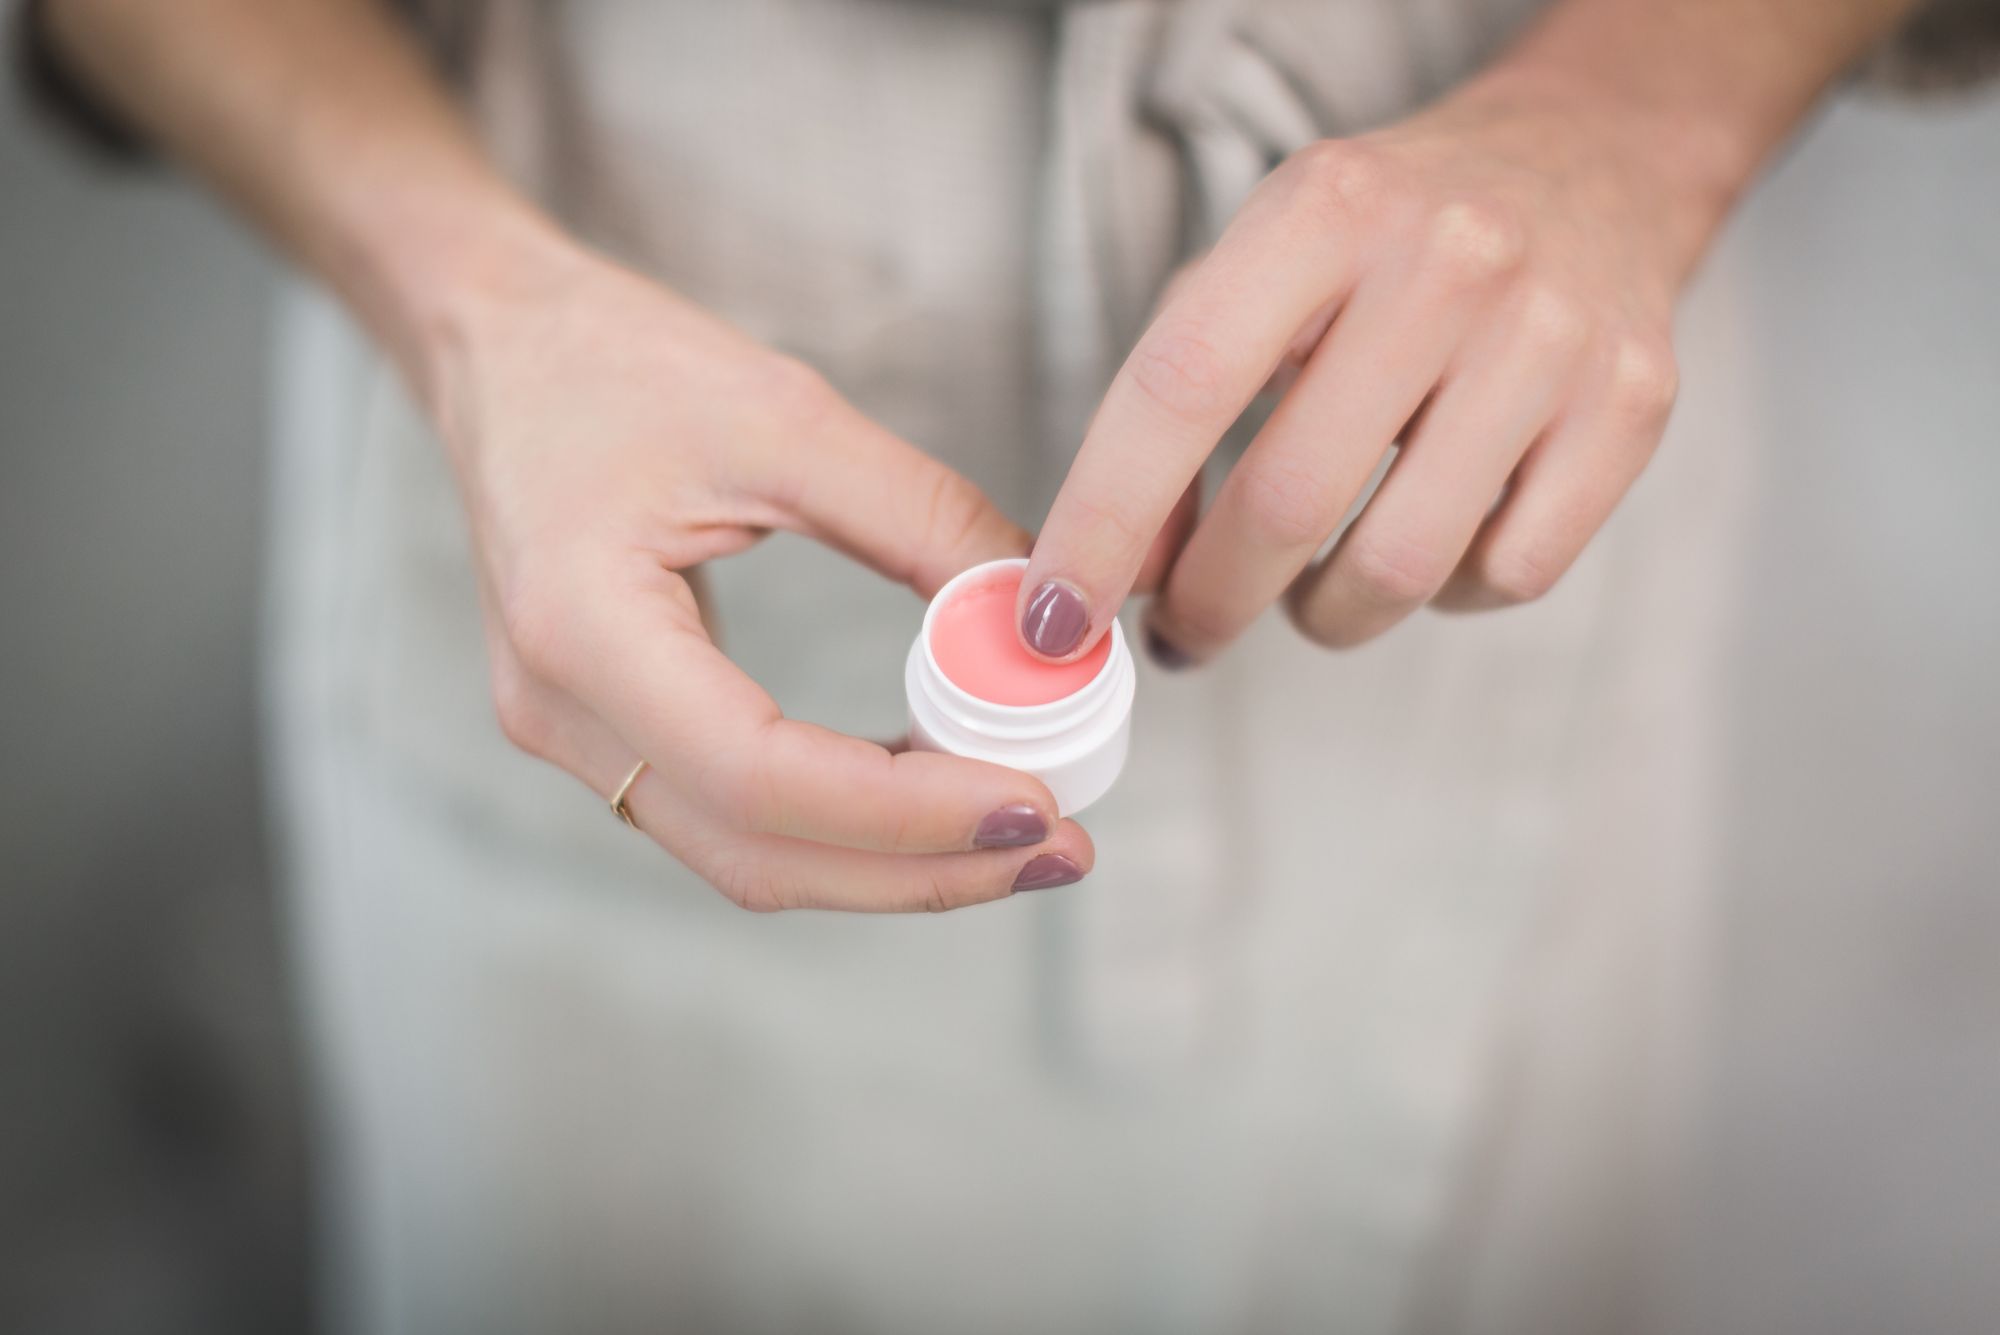 Use a lip balm with SPF to protect your lips